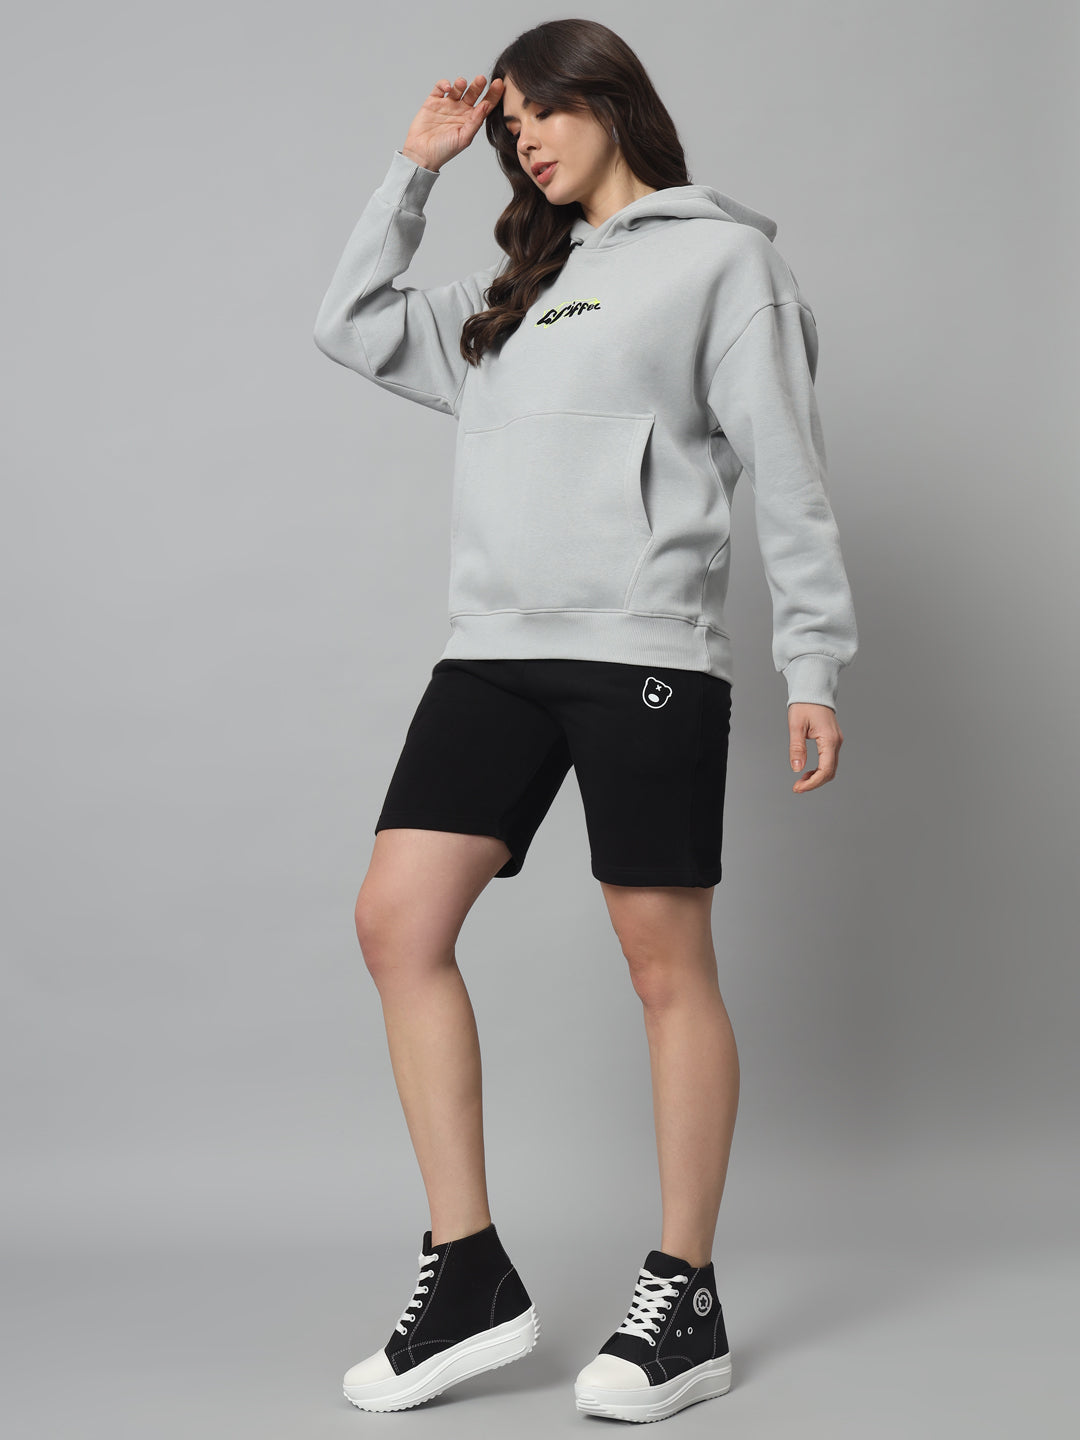 Griffel Women Oversized Grey ONE HUNDRES % LOYAL Print 100% Cotton Fleece Hoodie and Short Full set Tracksuit - griffel